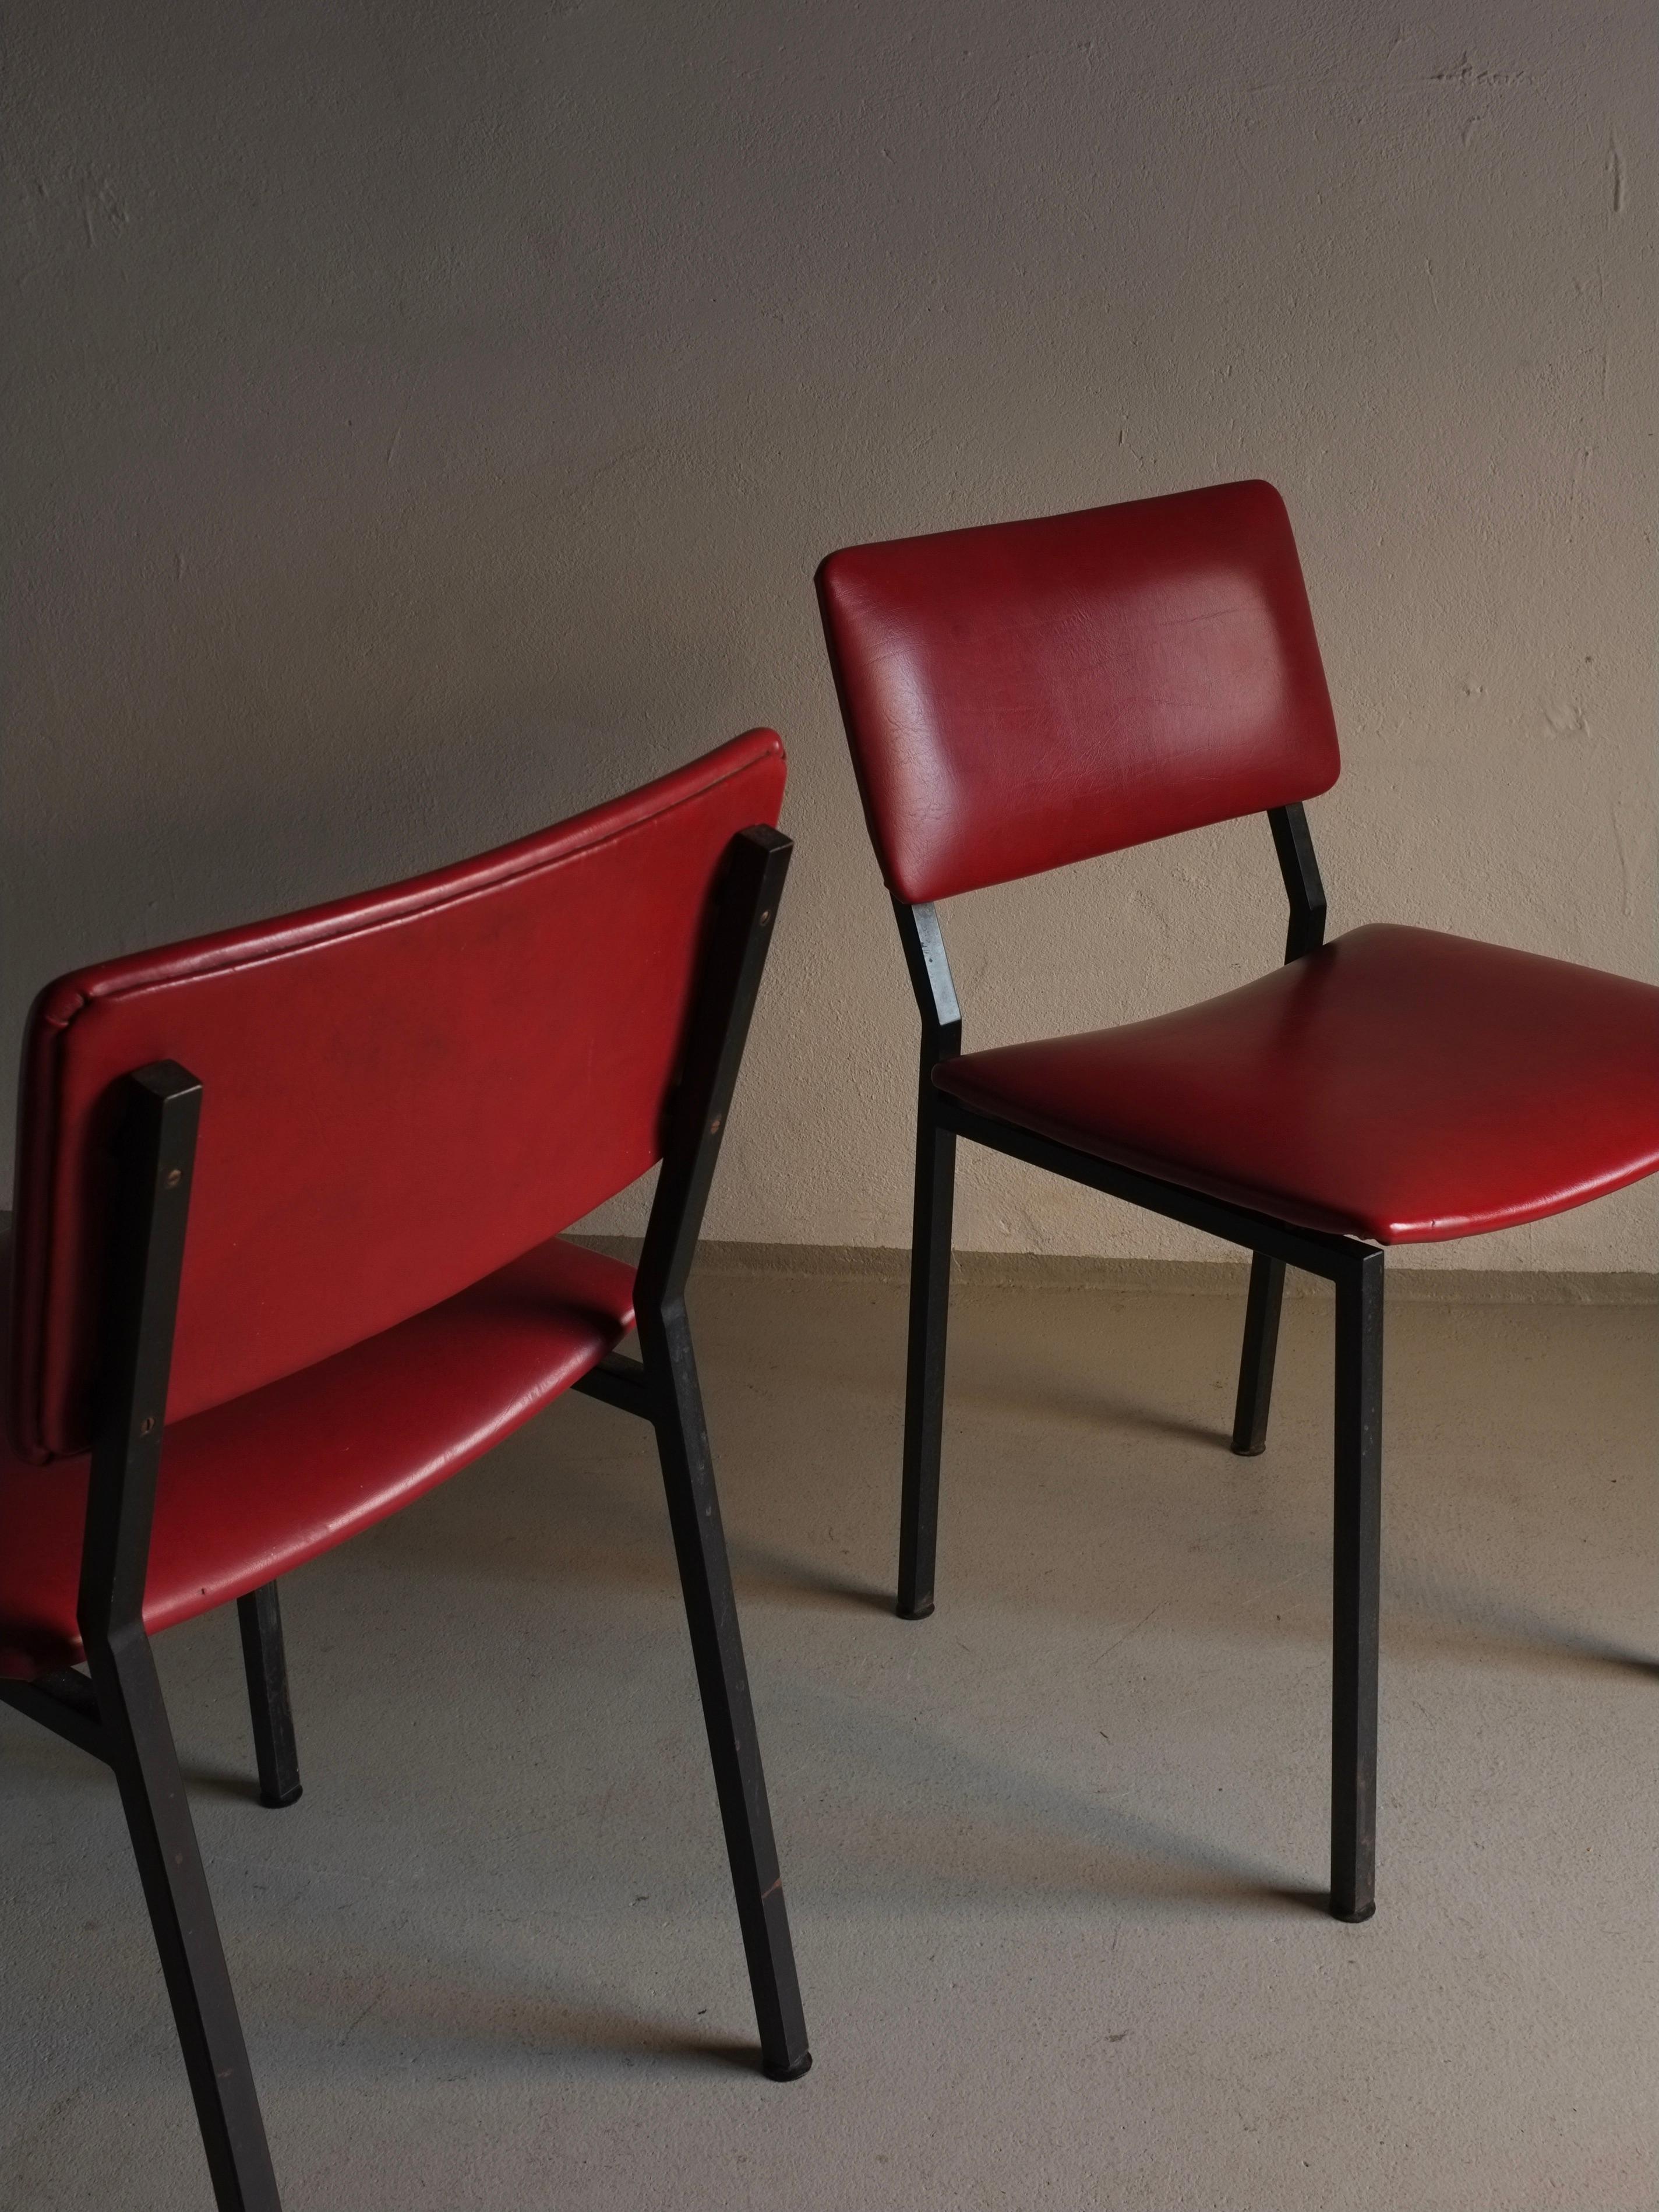 Set of 2 Black Metal Chairs by Gerrit Veenendaal For Kembo, Netherlands 1960s For Sale 1